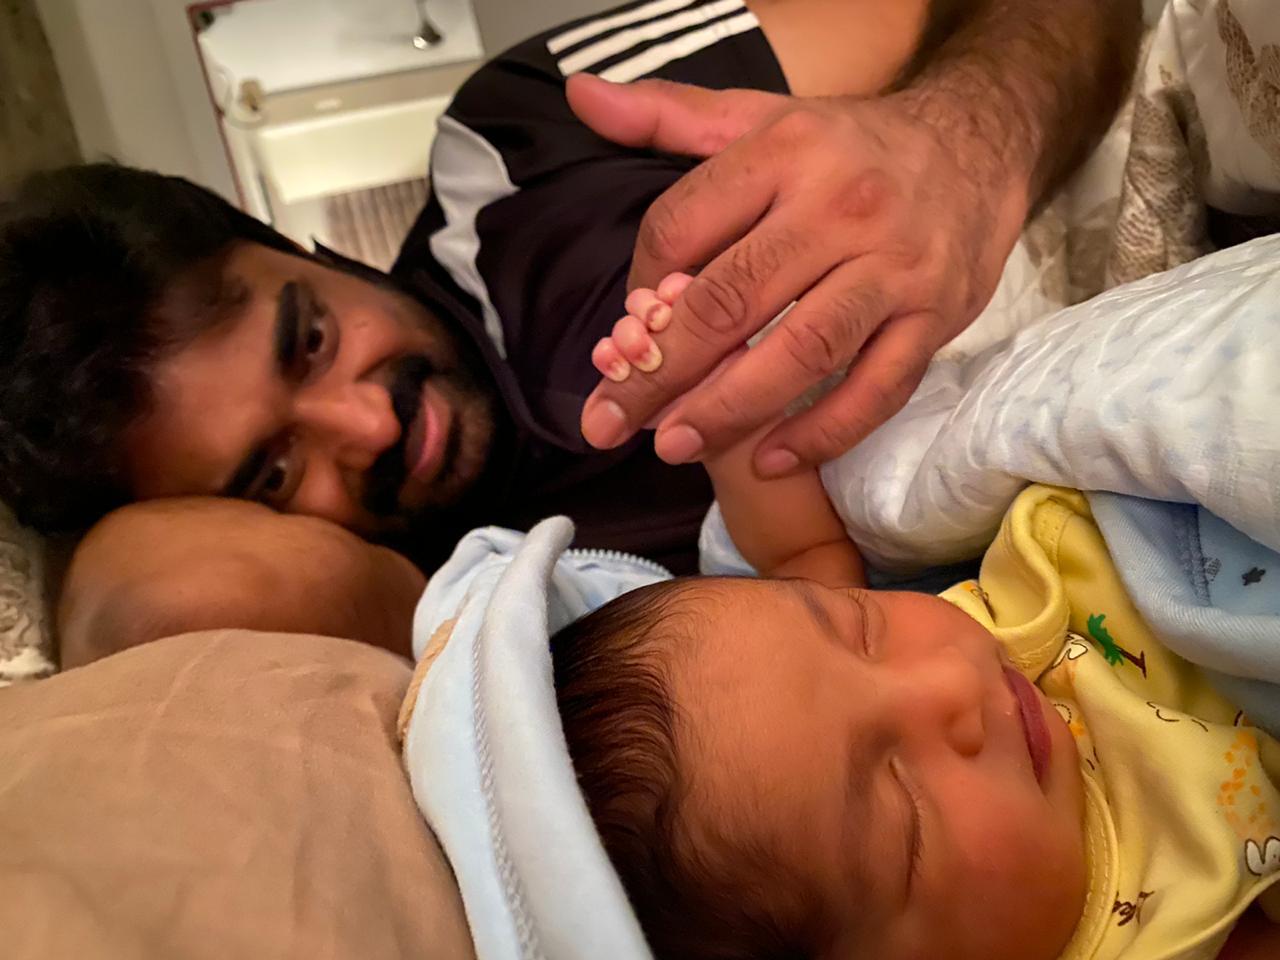 Thalaivi director Vijay’s cutest pic with son and wife is sure to win your hearts; viral pic